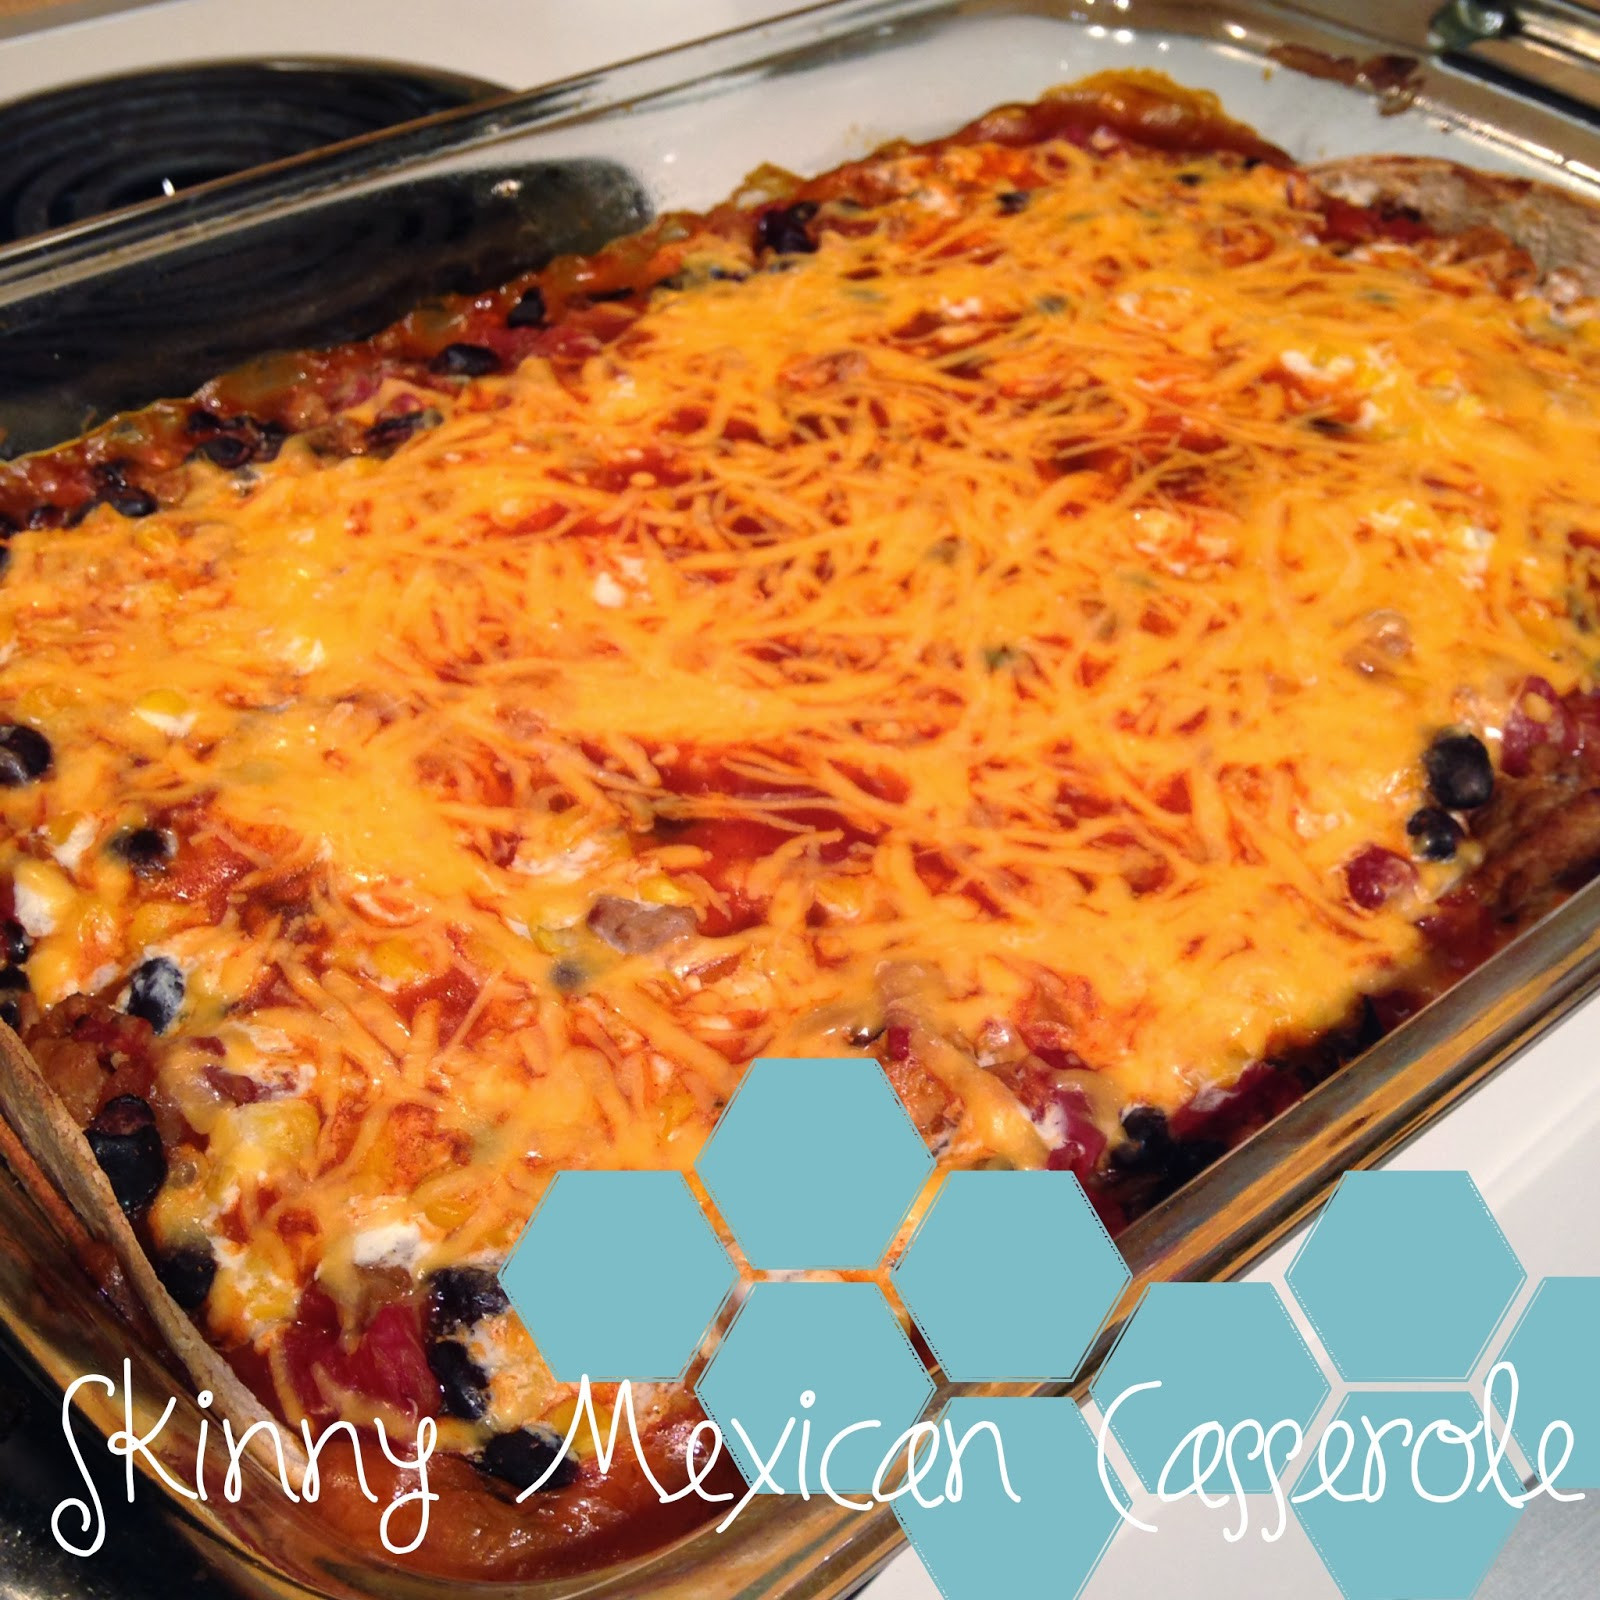 Skinny Mexican Casserole
 Working on My Forever Skinny Mexican Casserole